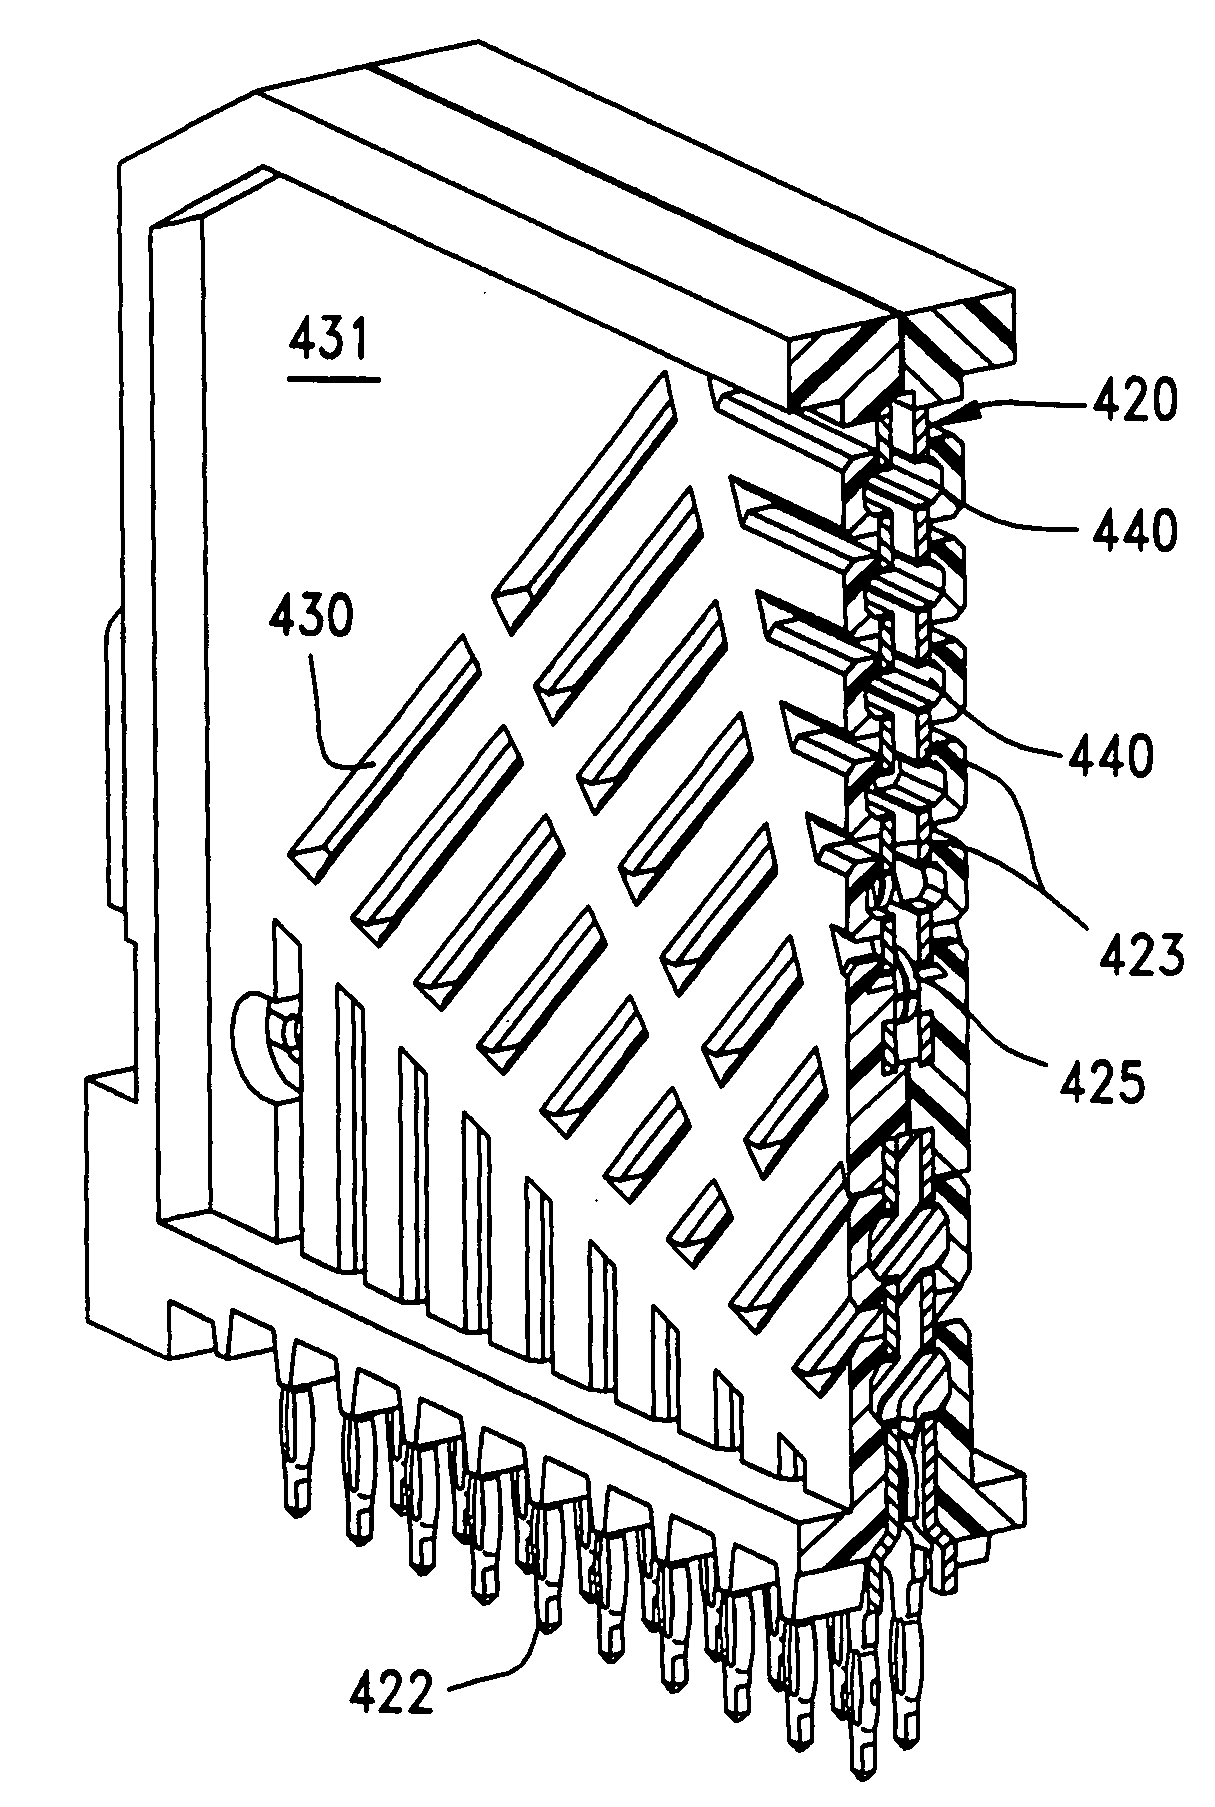 High-density, robust connector with castellations